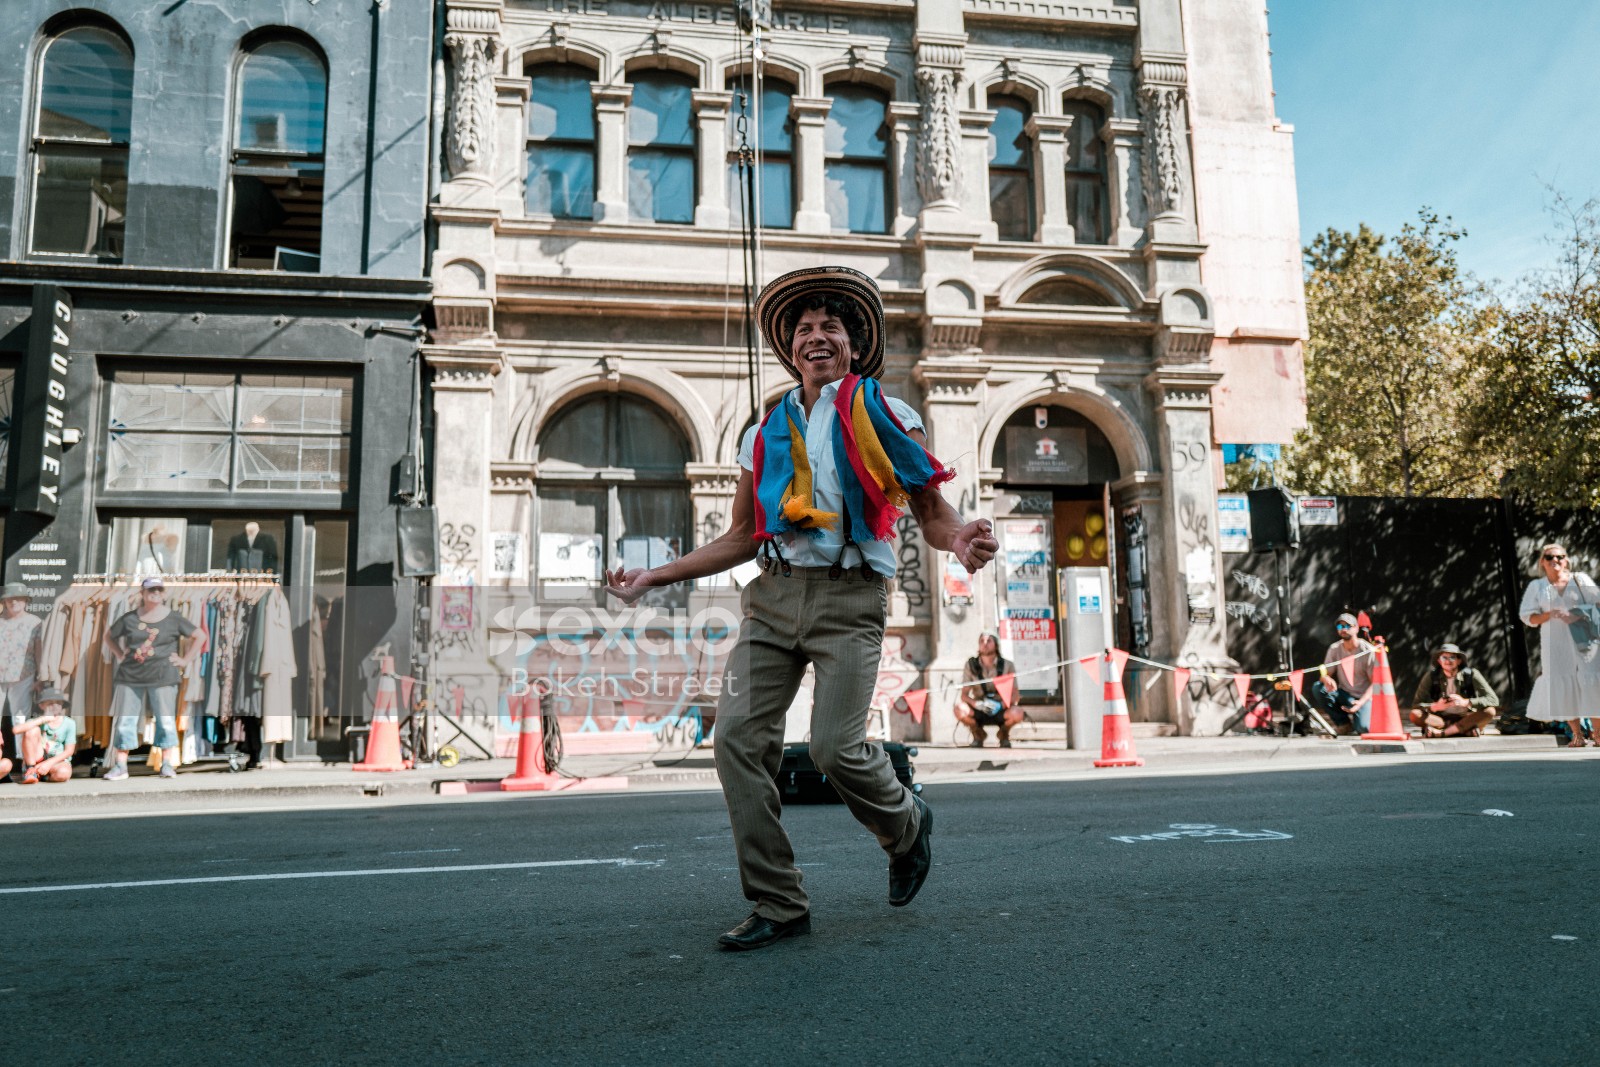 Man in costume dancing at an event